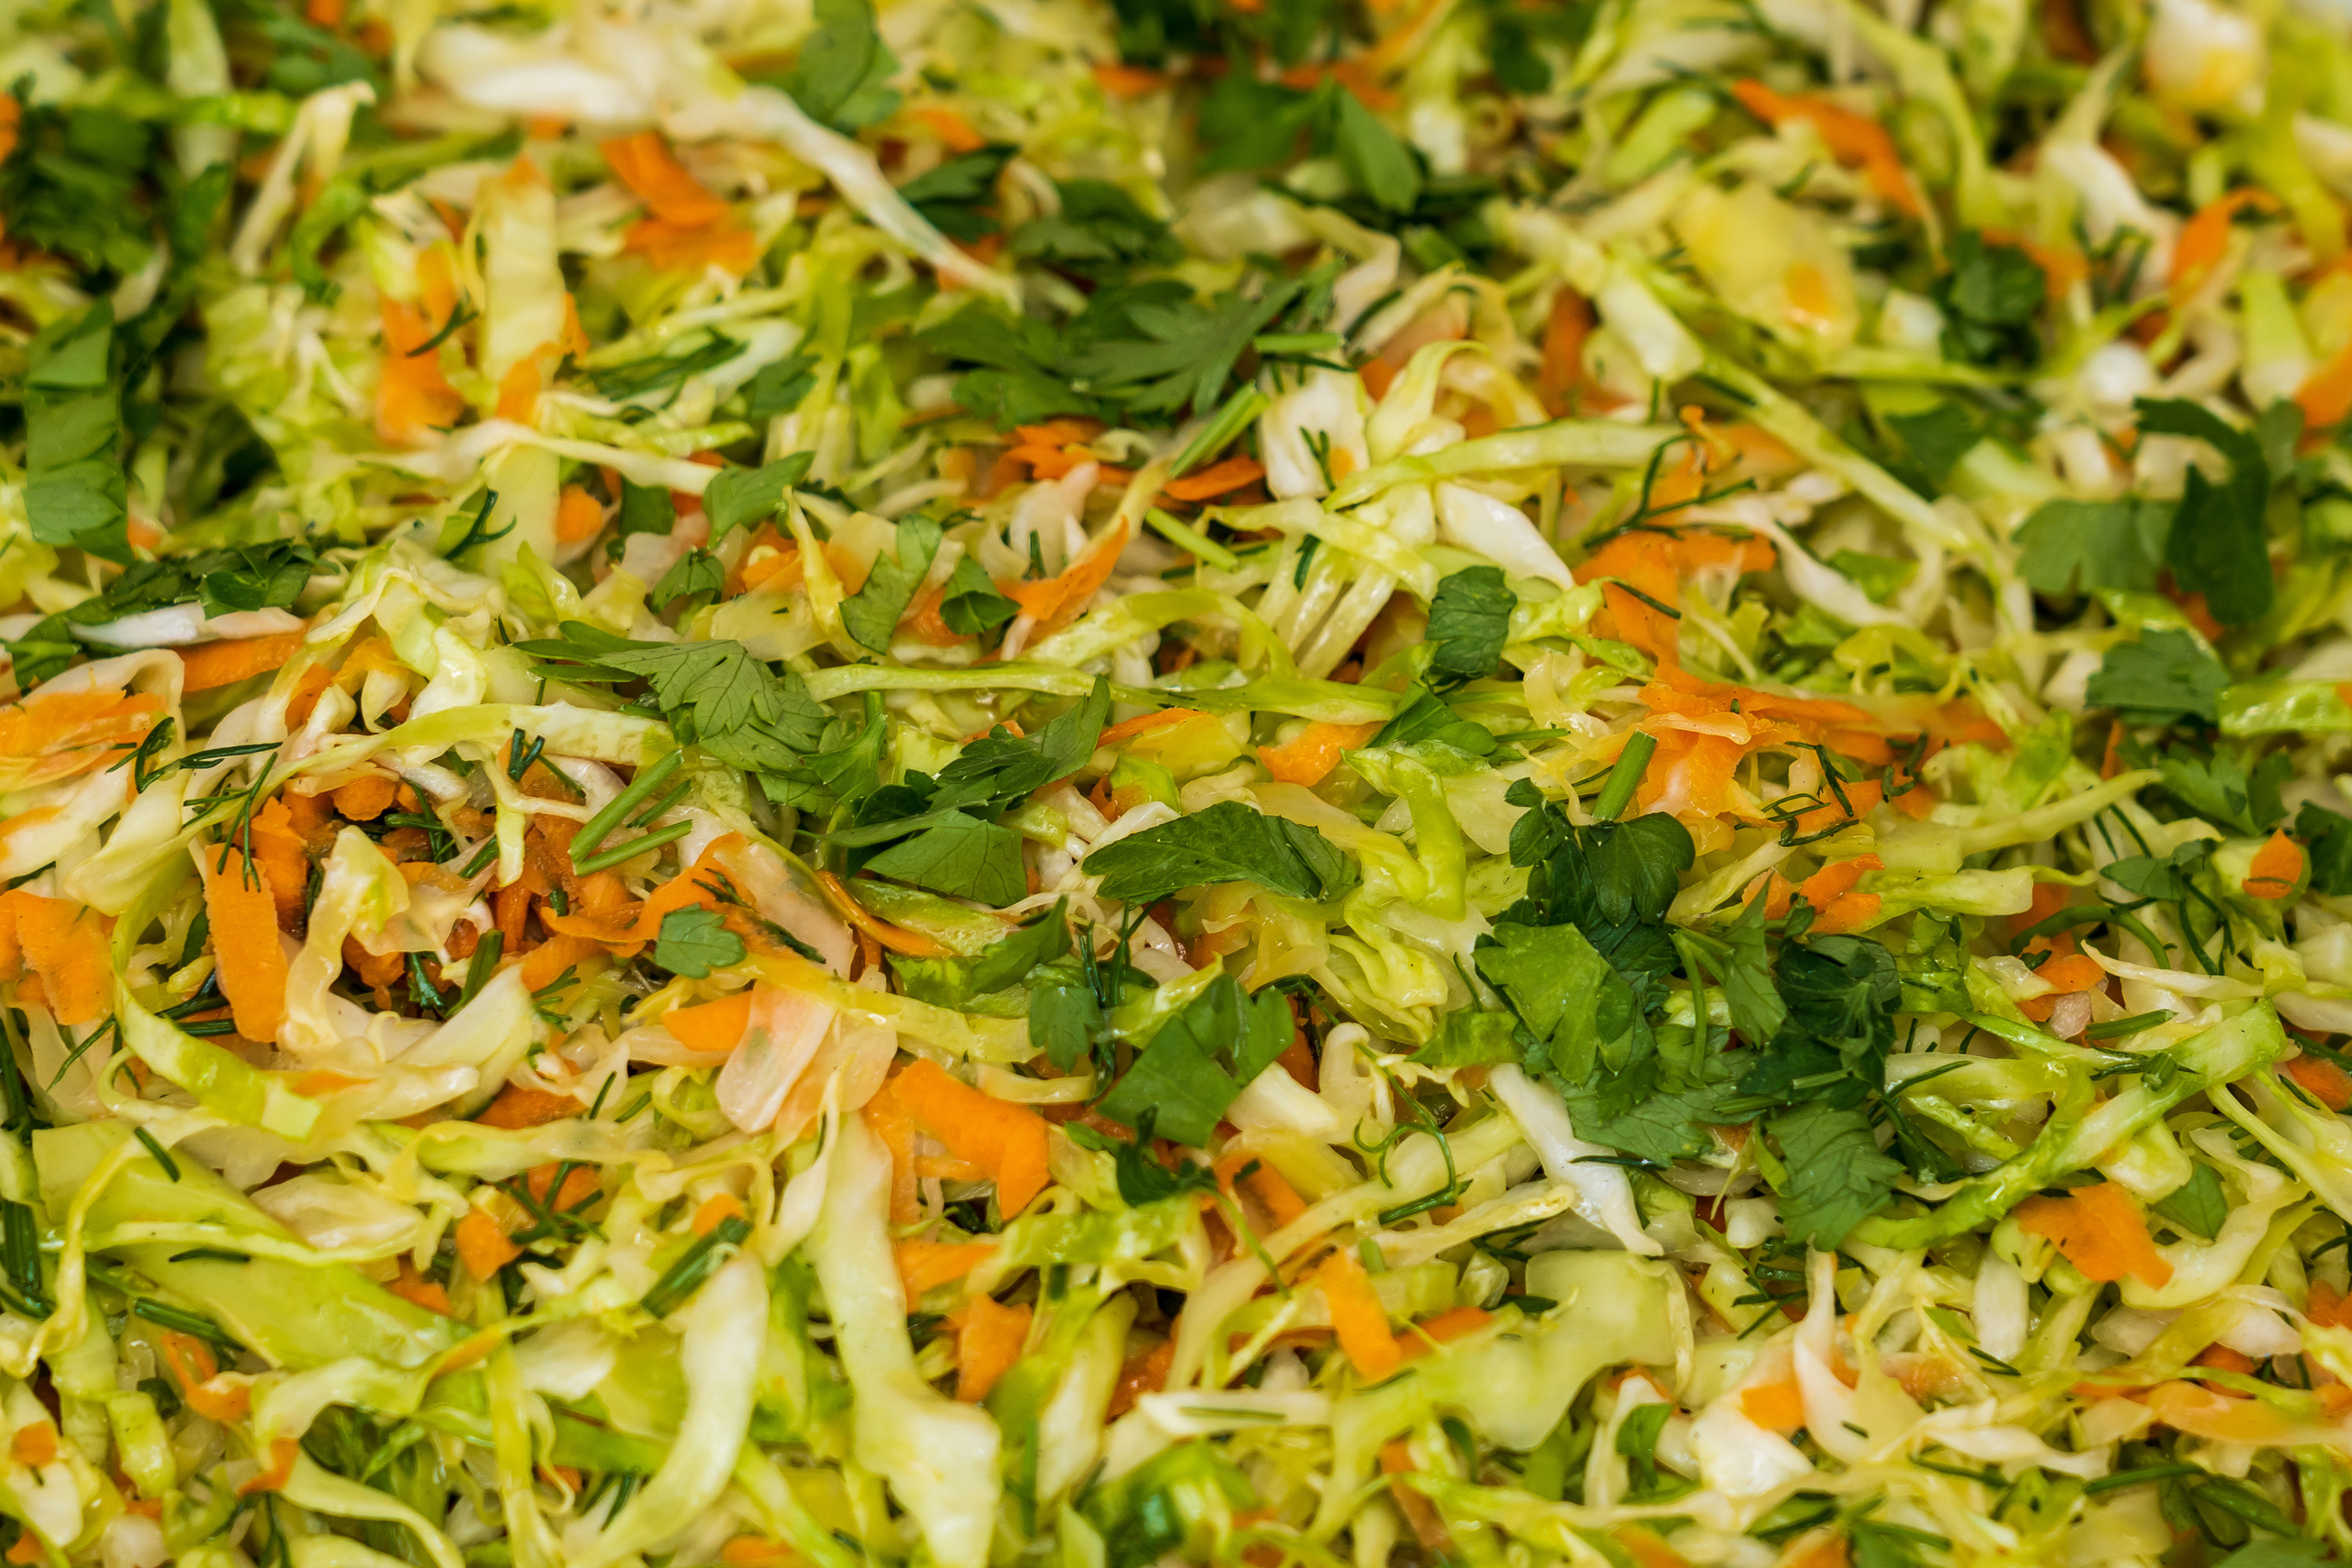 Up-close coleslaw with cabbage, carrots and parsely